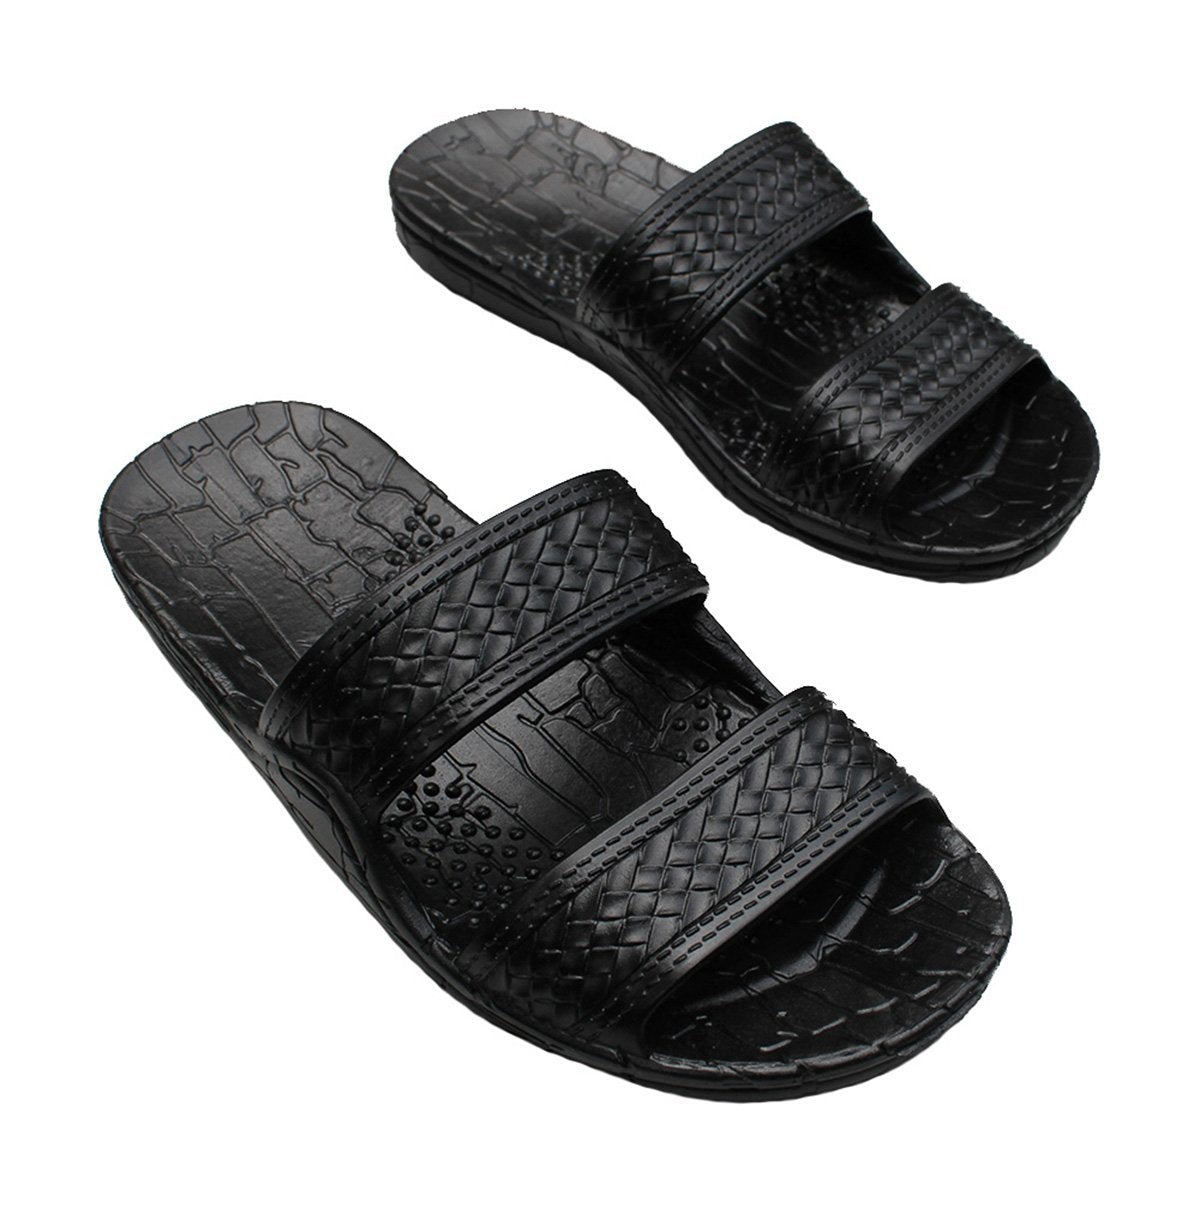 Brown Jesus Sandals | Black Jandals From Hawaii - AlohaShoes.com